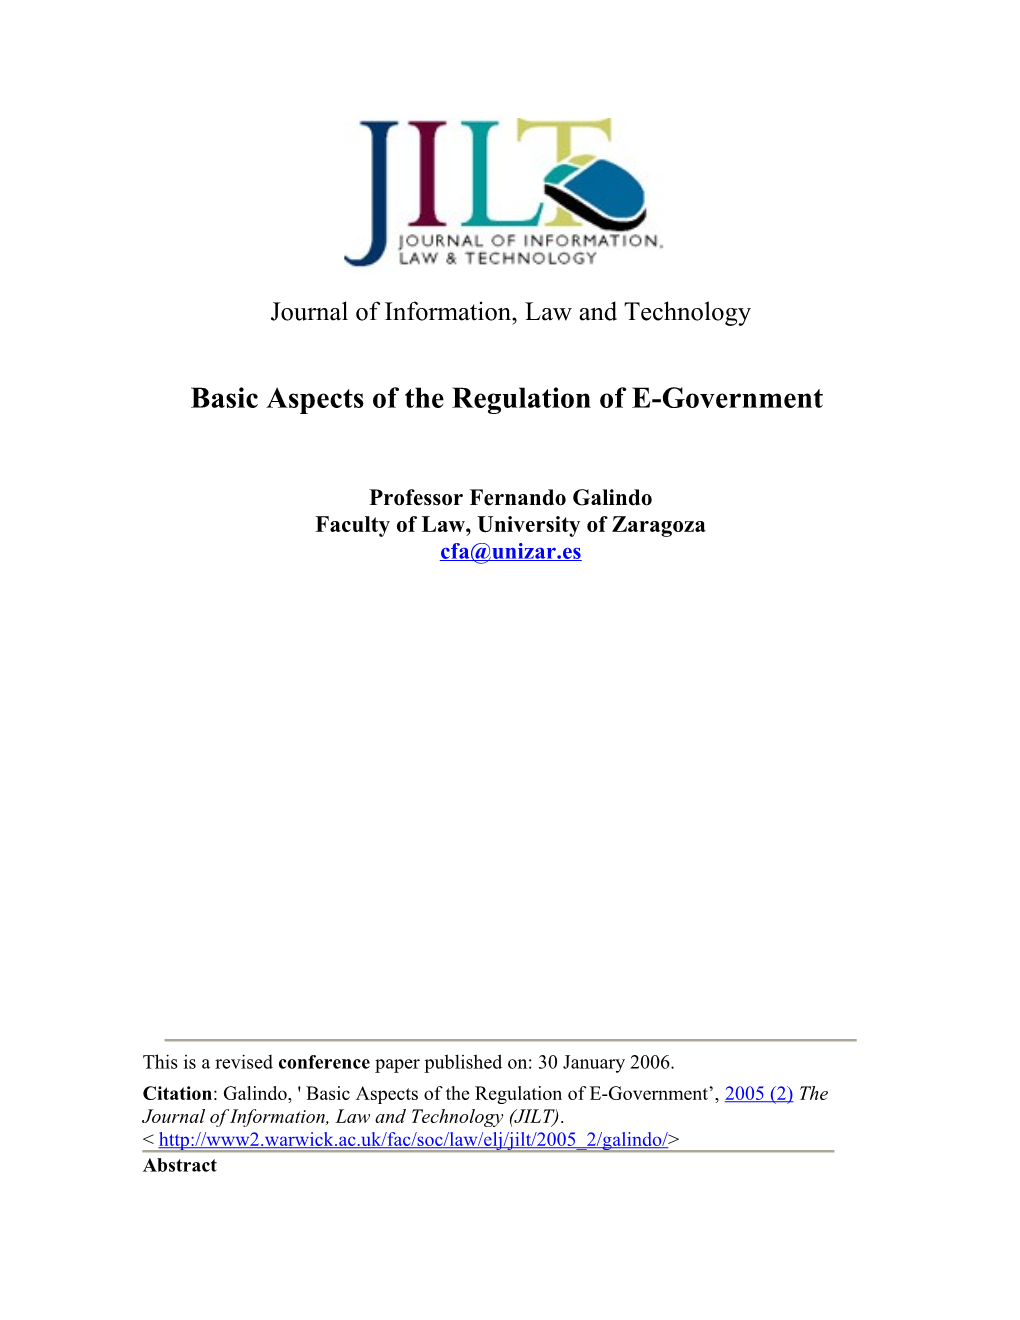 Basic Aspects of the Regulation of E-Government